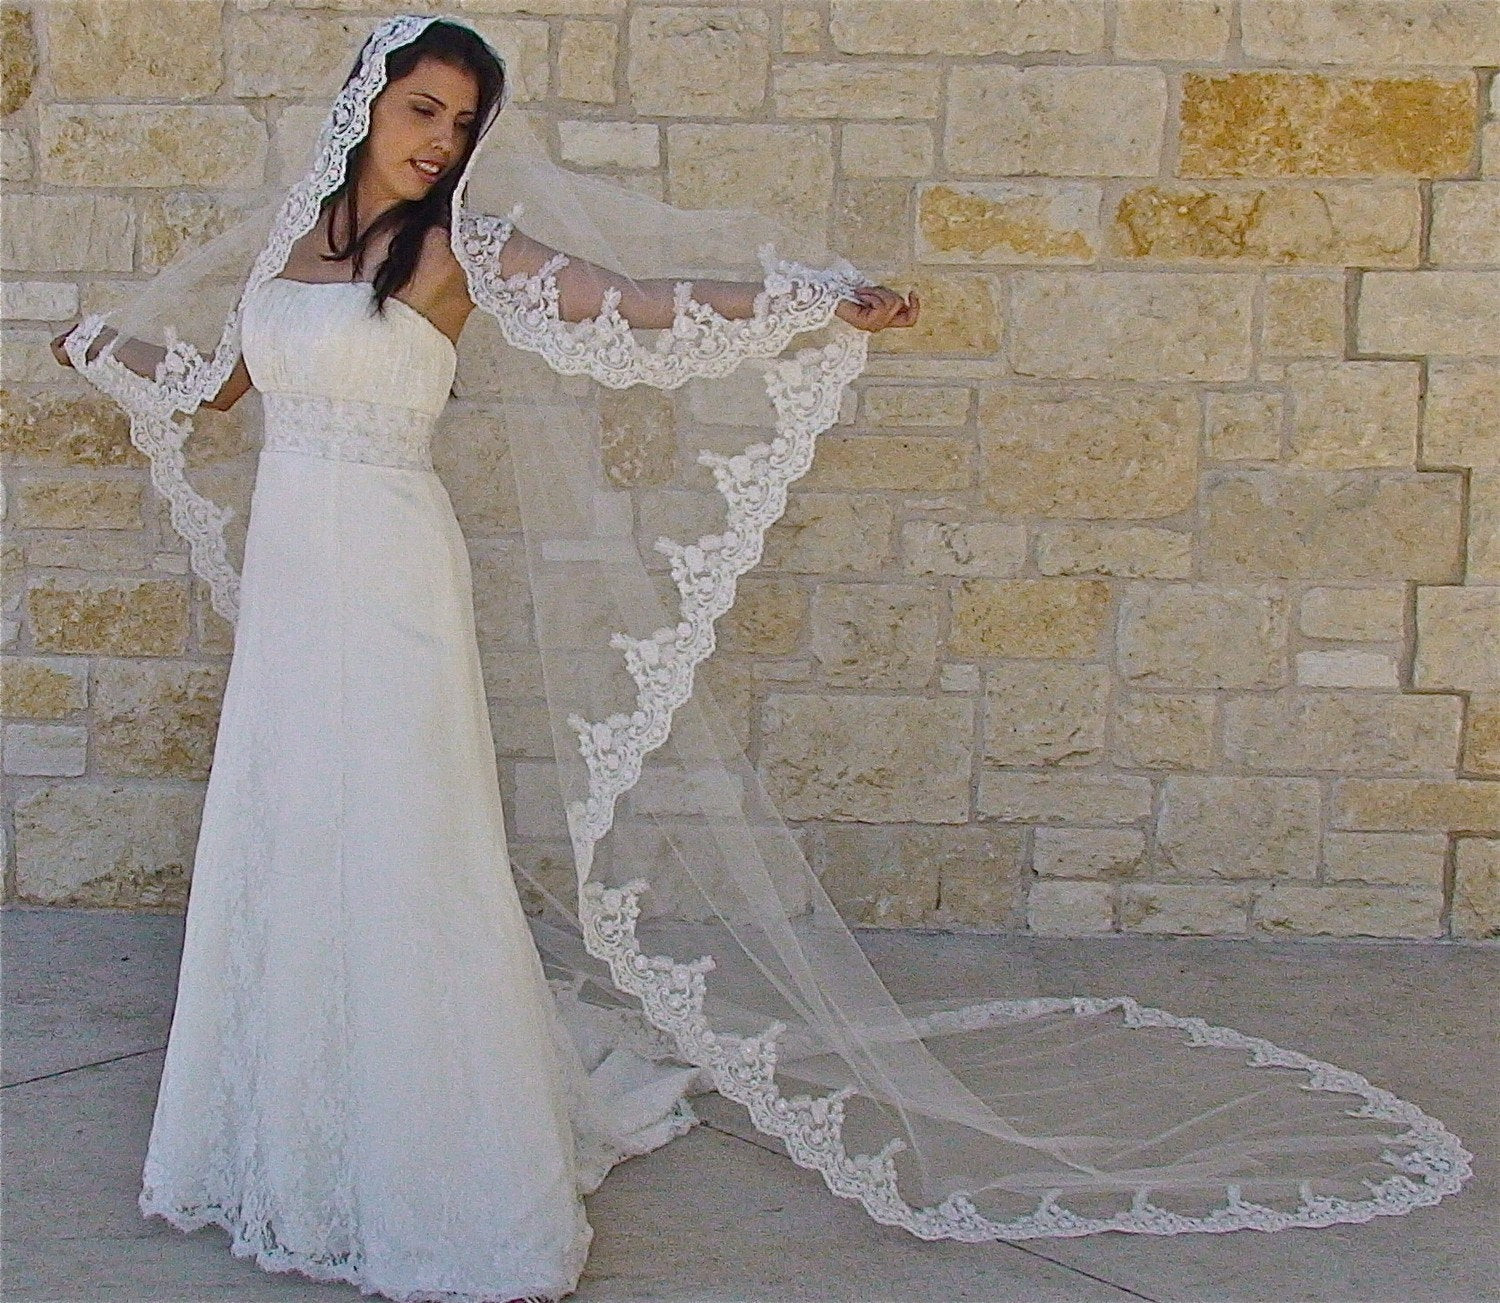 Spanish Mantilla Wedding Veil
 Mantilla Veil with Beaded Lace in CATHEDRAL LENGTH Spanish